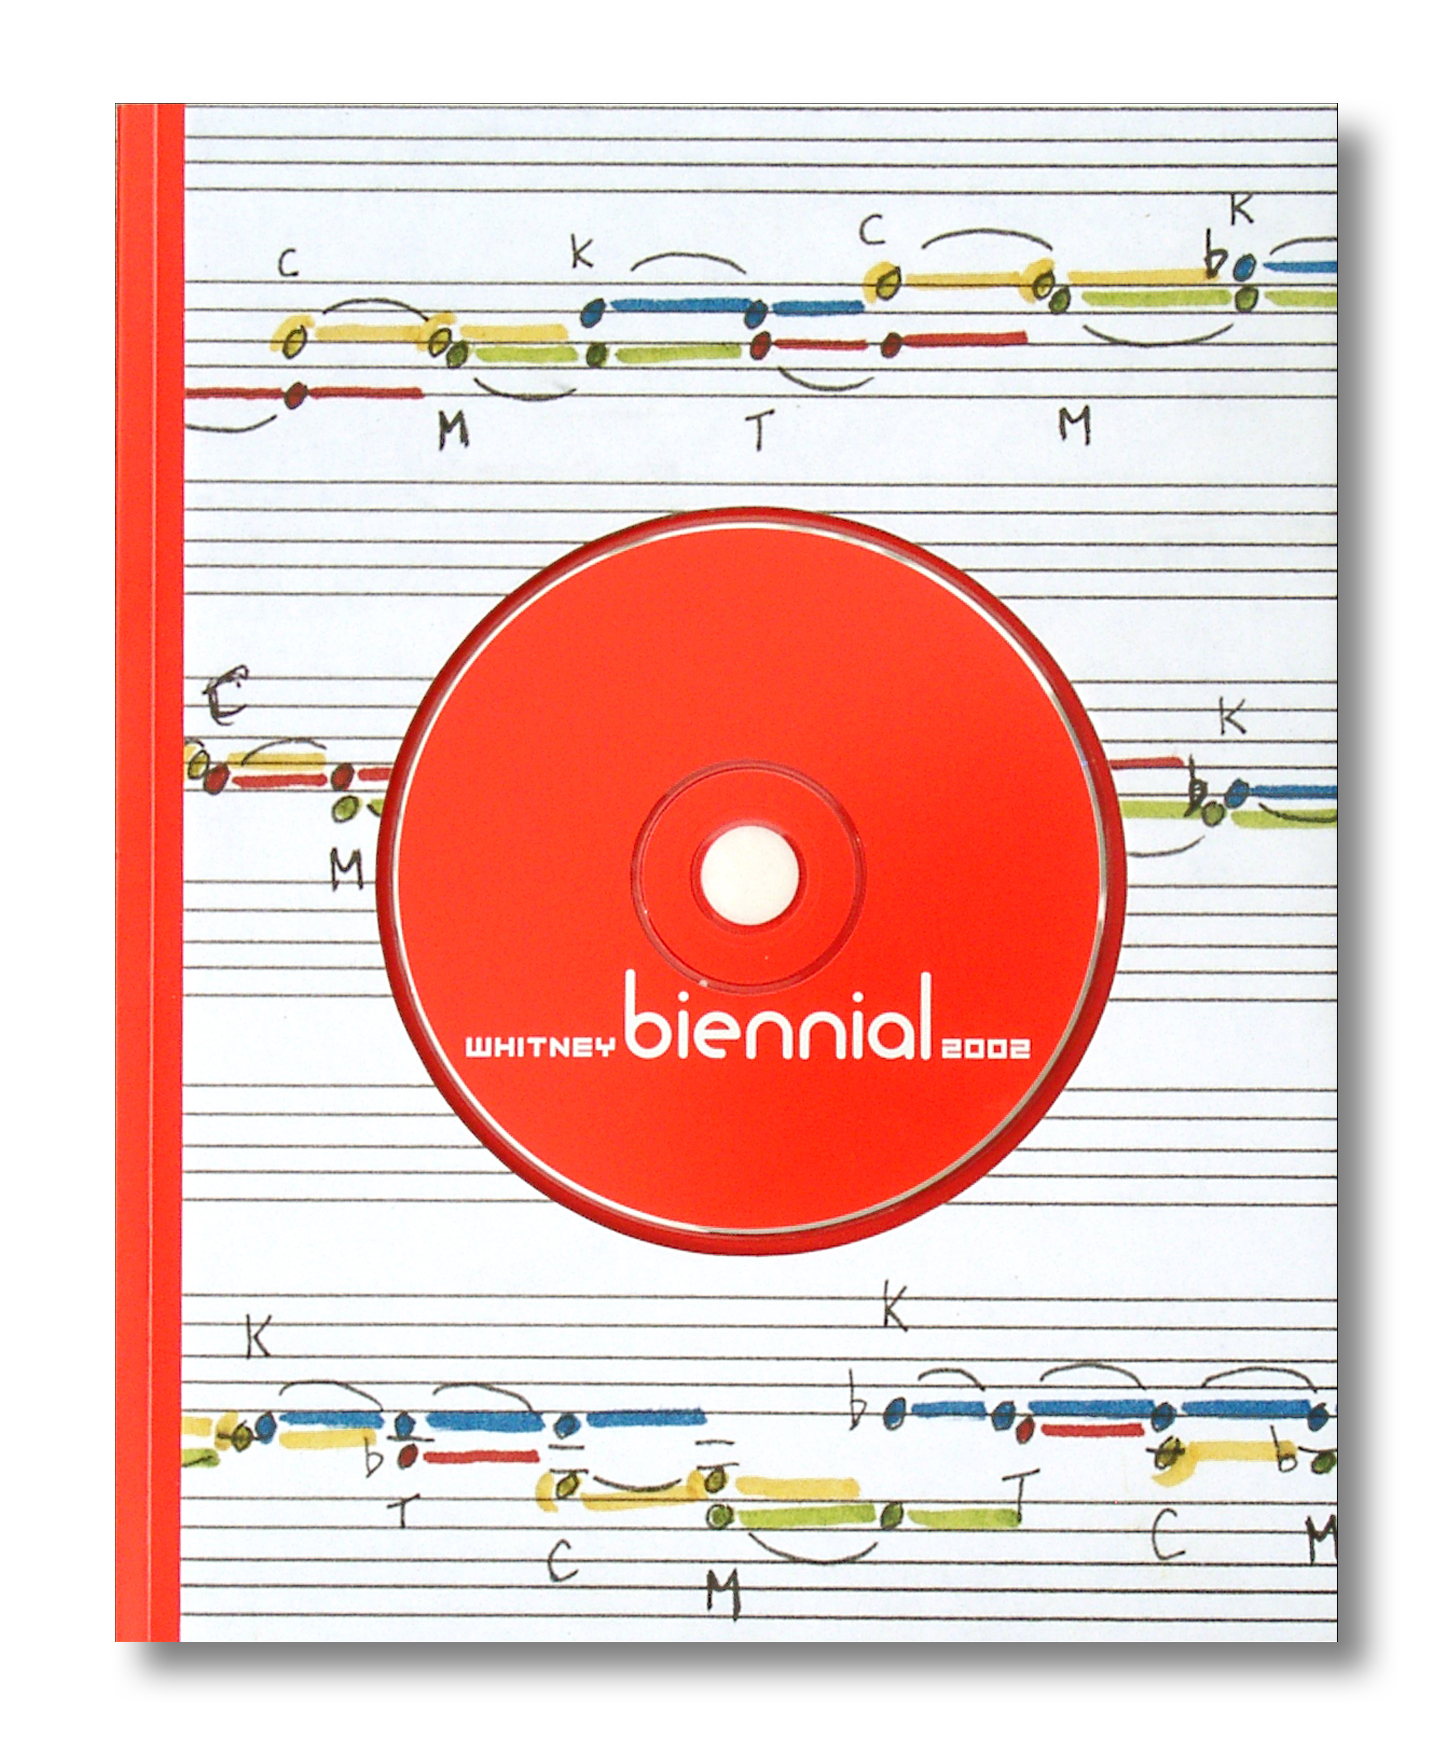 The cover for the 2002 Whitney Biennial catalog which features an excerpt of a musical score by Meredith Monk